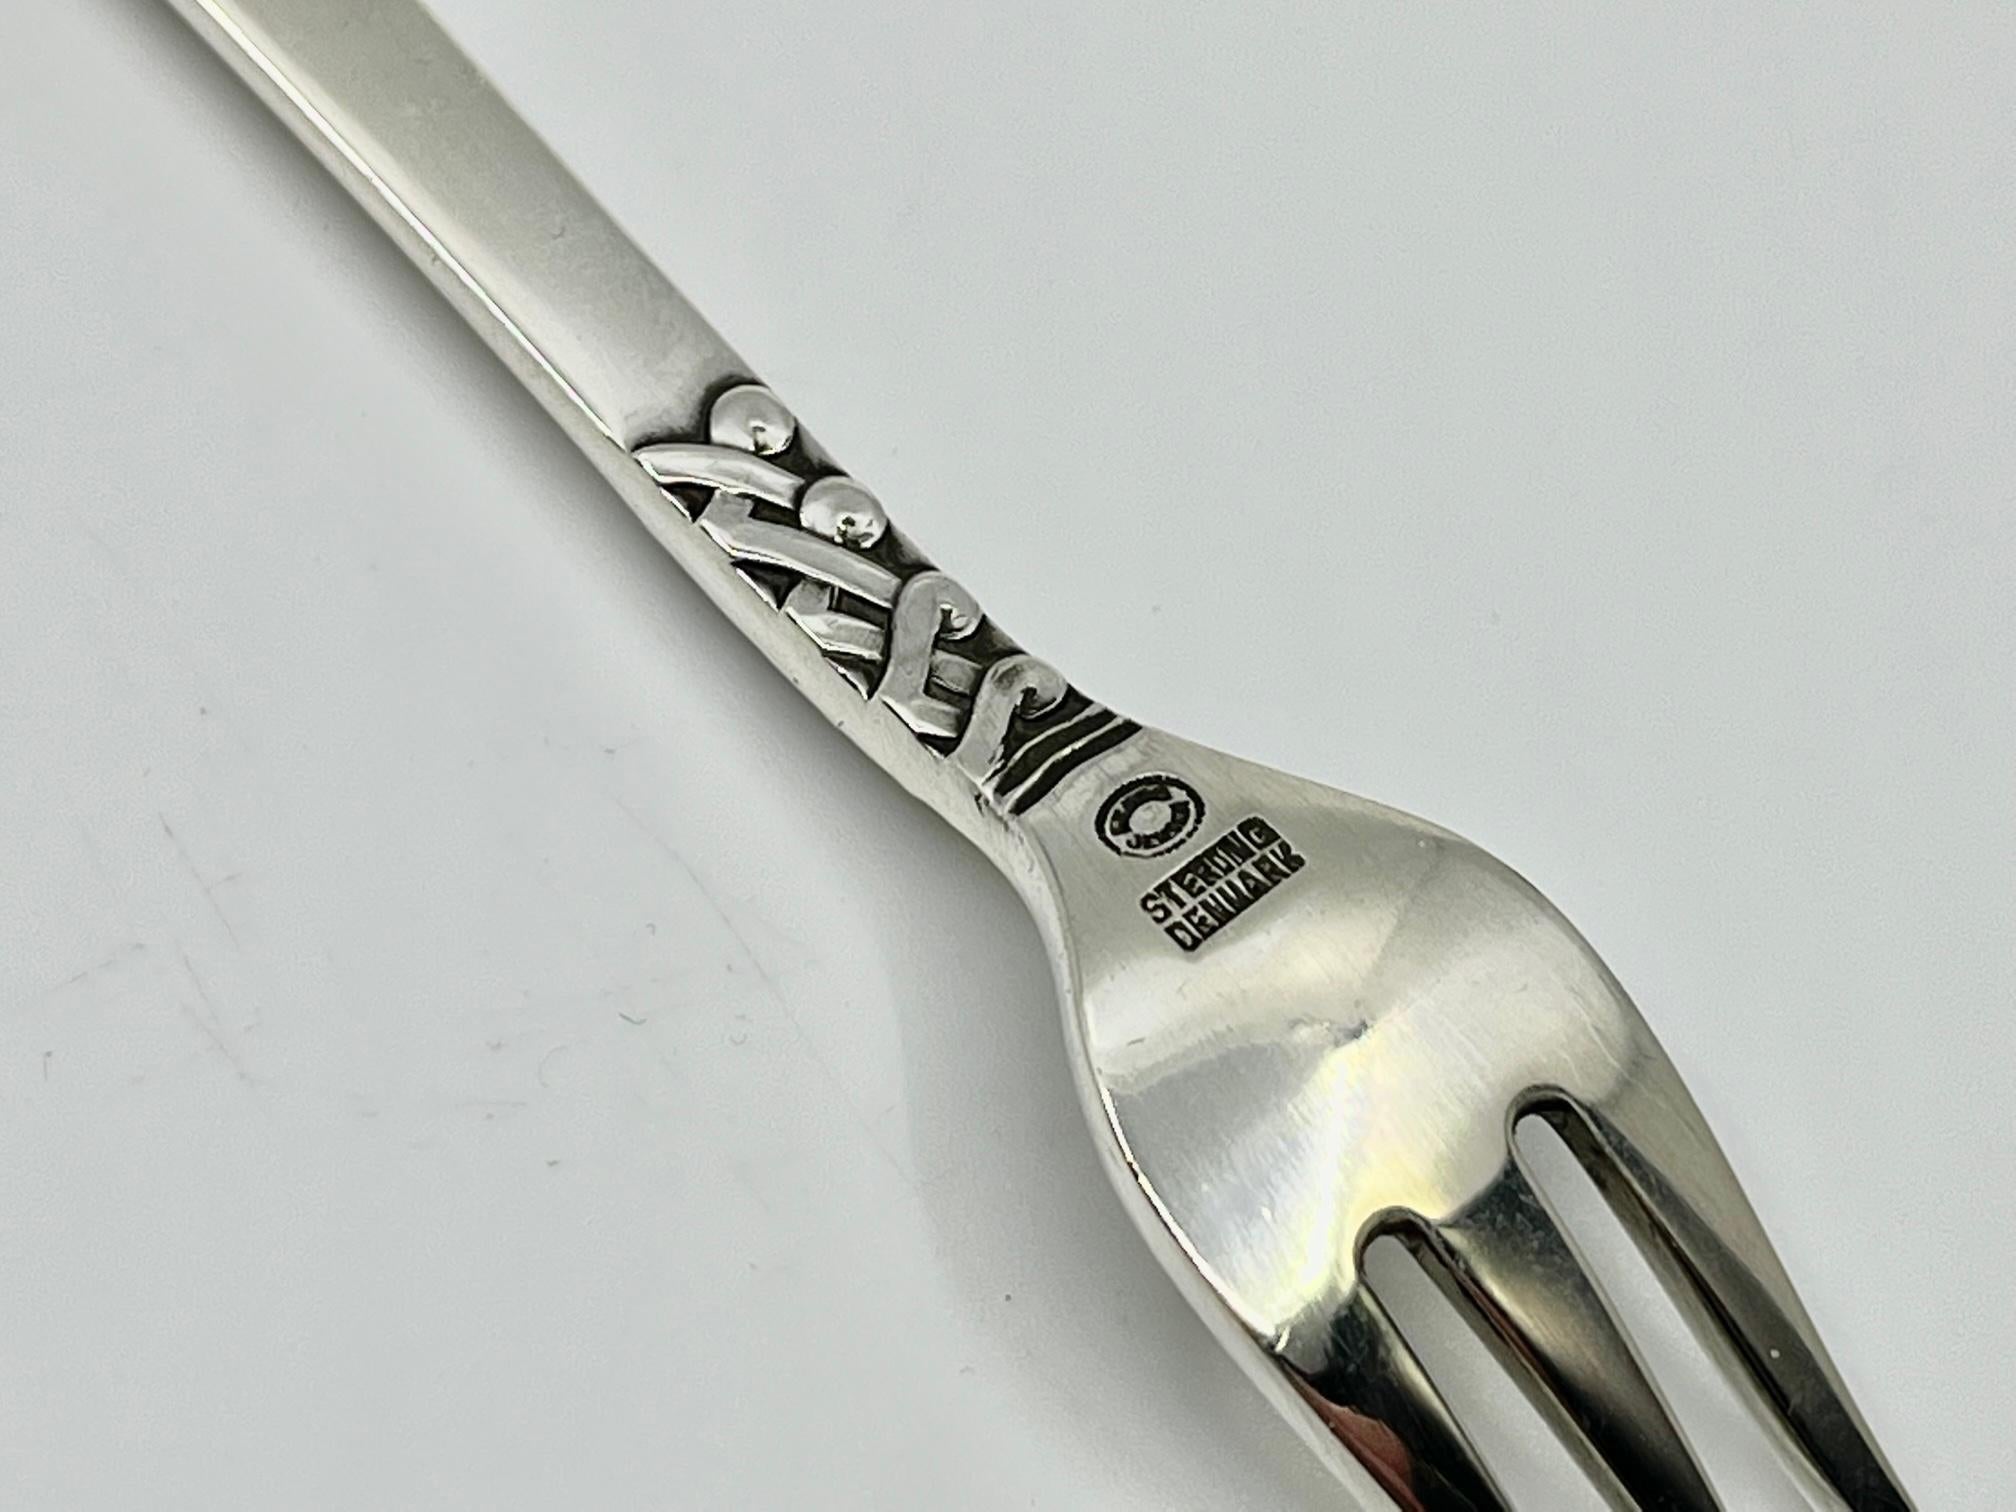 Sterling silver Georg Jensen seafood cocktail/oyster fork, item #064 in the Ladby/Nordic pattern, design #76 by Oscar Gundlach-Pedersen from 1937.

Additional information:
Material: Sterling silver
Styles: Art Deco
Hallmarks: With Georg Jensen